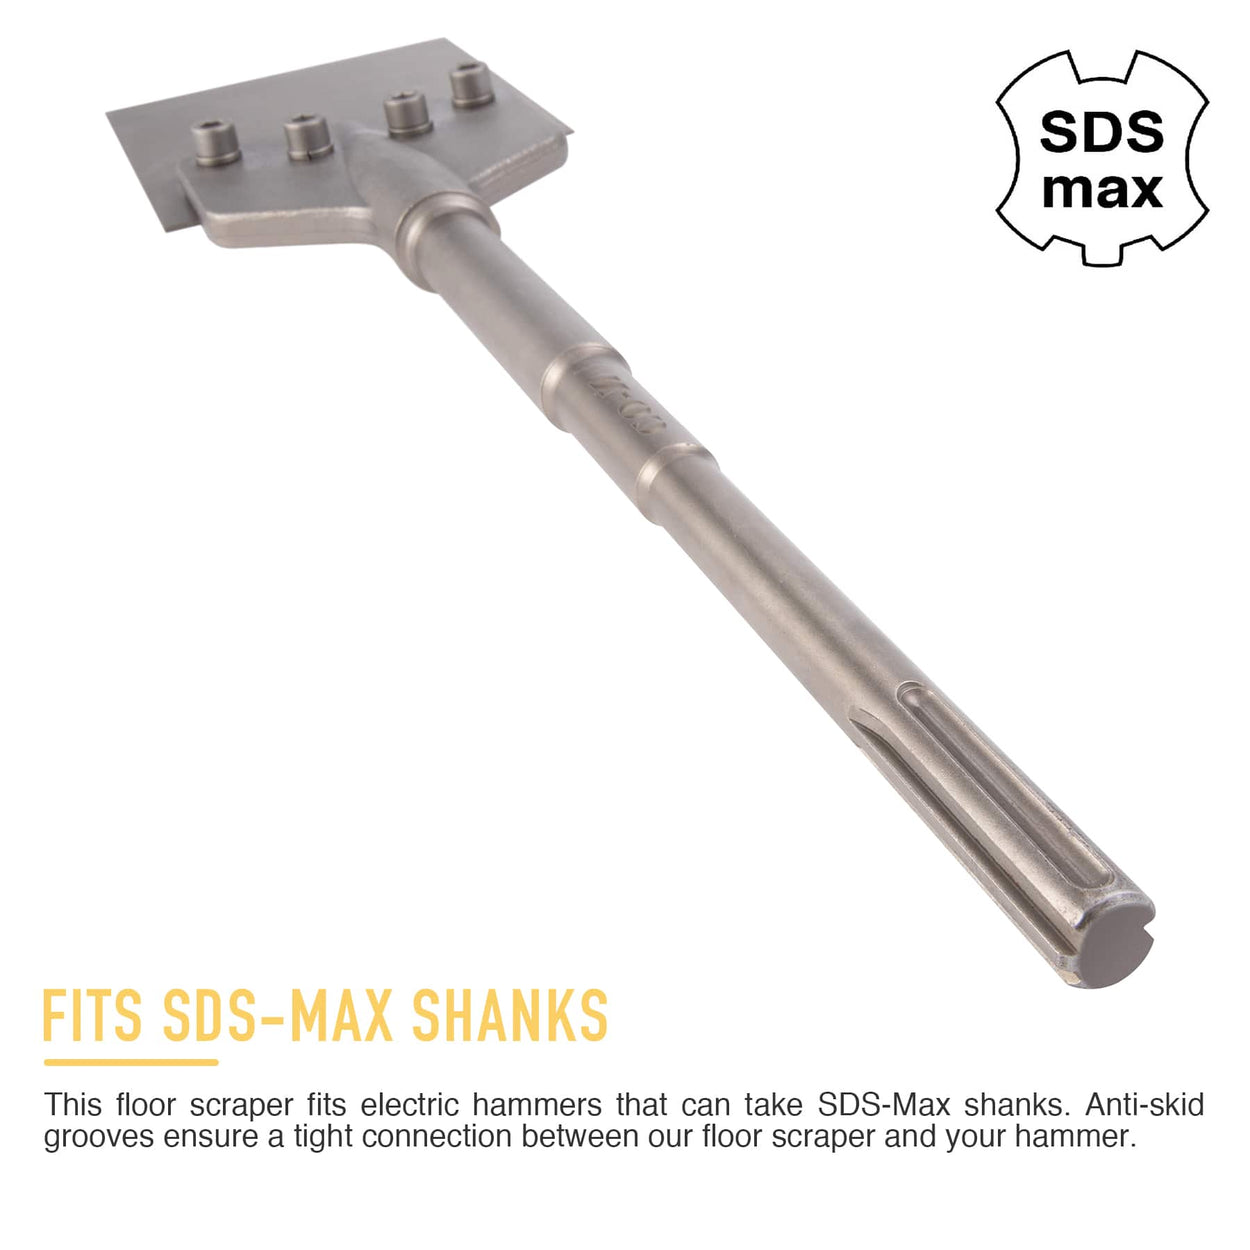 Drills Compatible with SDS-Max Bits